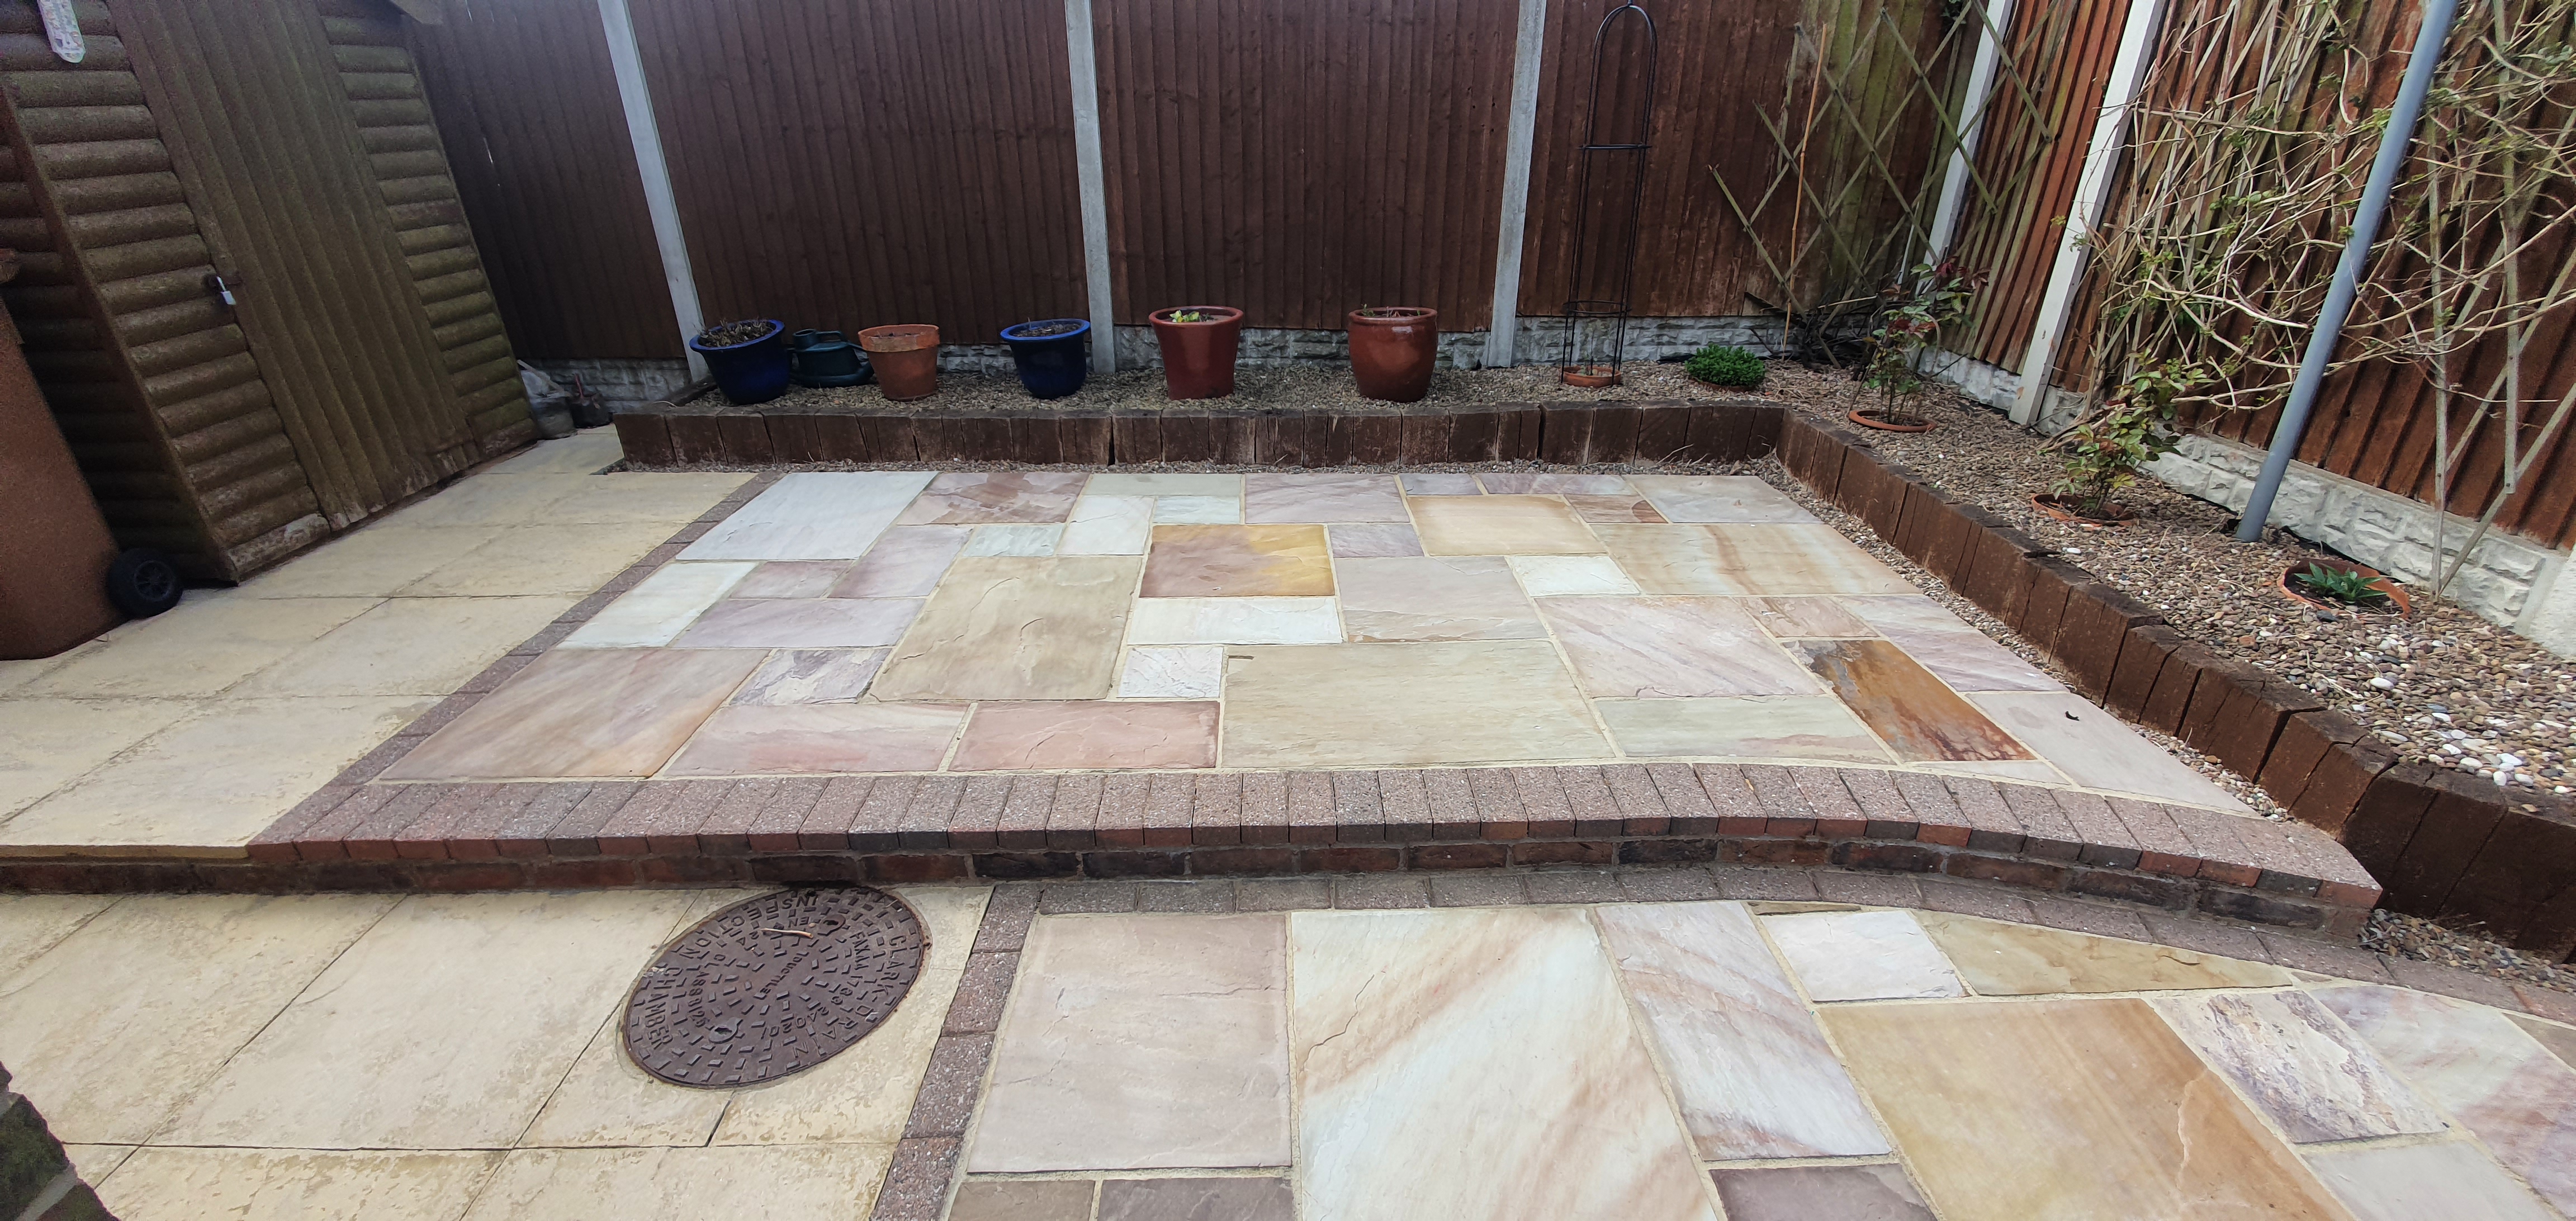 Patio - Driveway Cleaning Scunthorpe